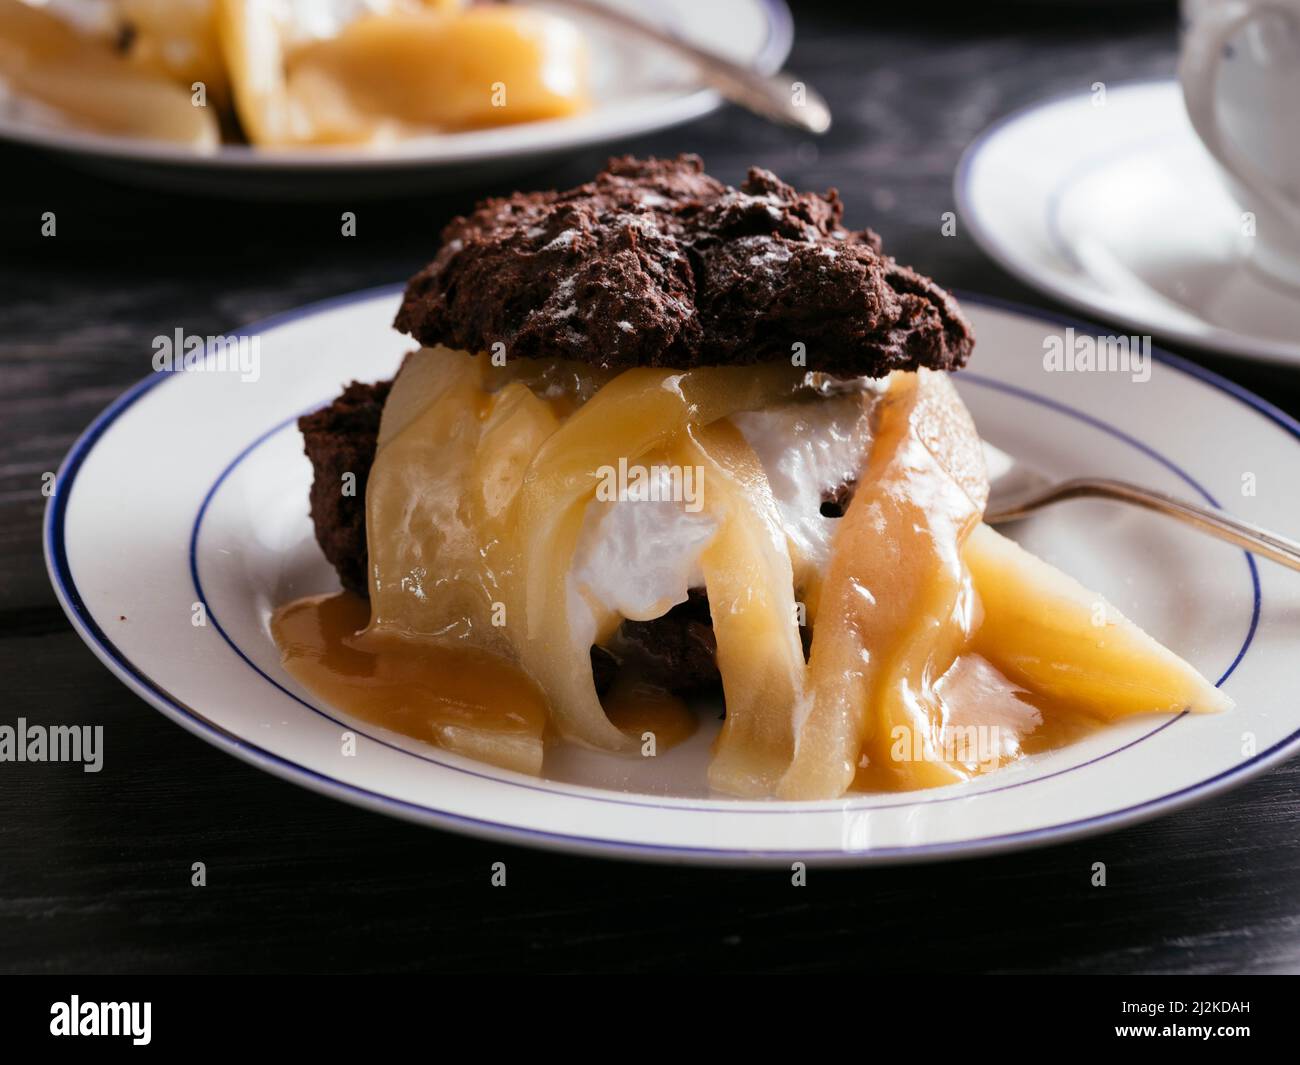 Vegan Chocolate Shortcakes with Pears and Caramel Sauce Stock Photo